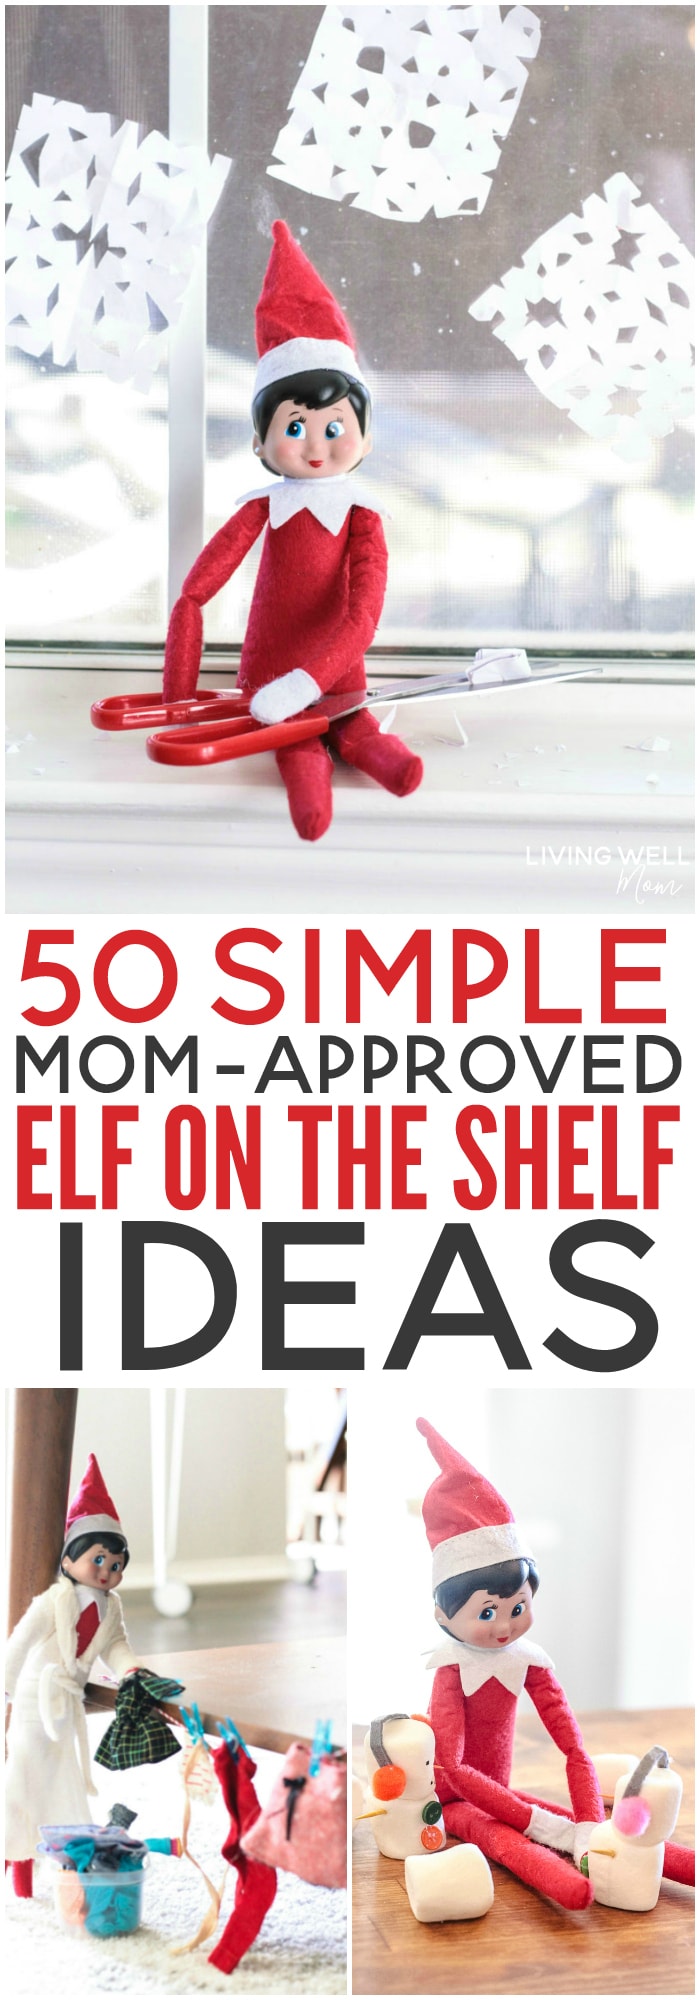 Looking for SIMPLE ideas for your Elf on the Shelf? Here are 50 Mom-approved EASY Elf-on-the-shelf ideas that don't require elaborate planning or setup! Plus download a free printable.